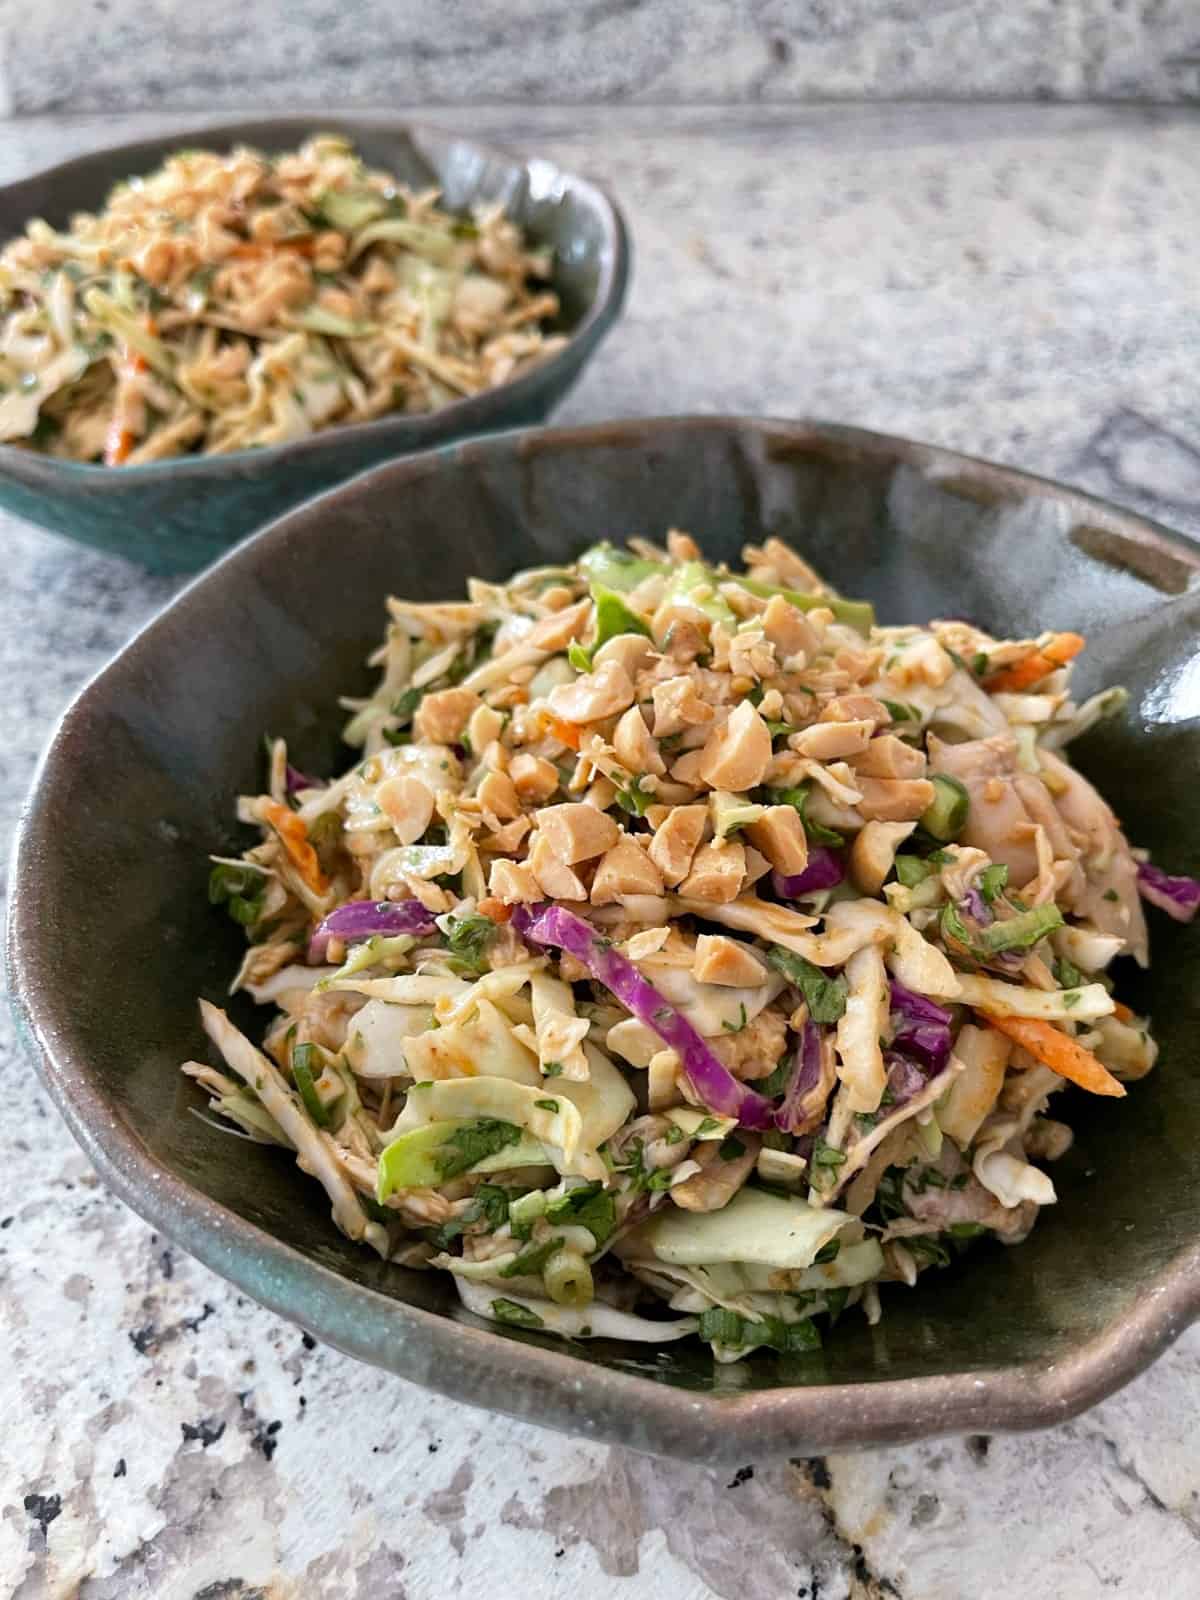 Thai cabbage salad with chicken in two green ceramic bowls on granite.